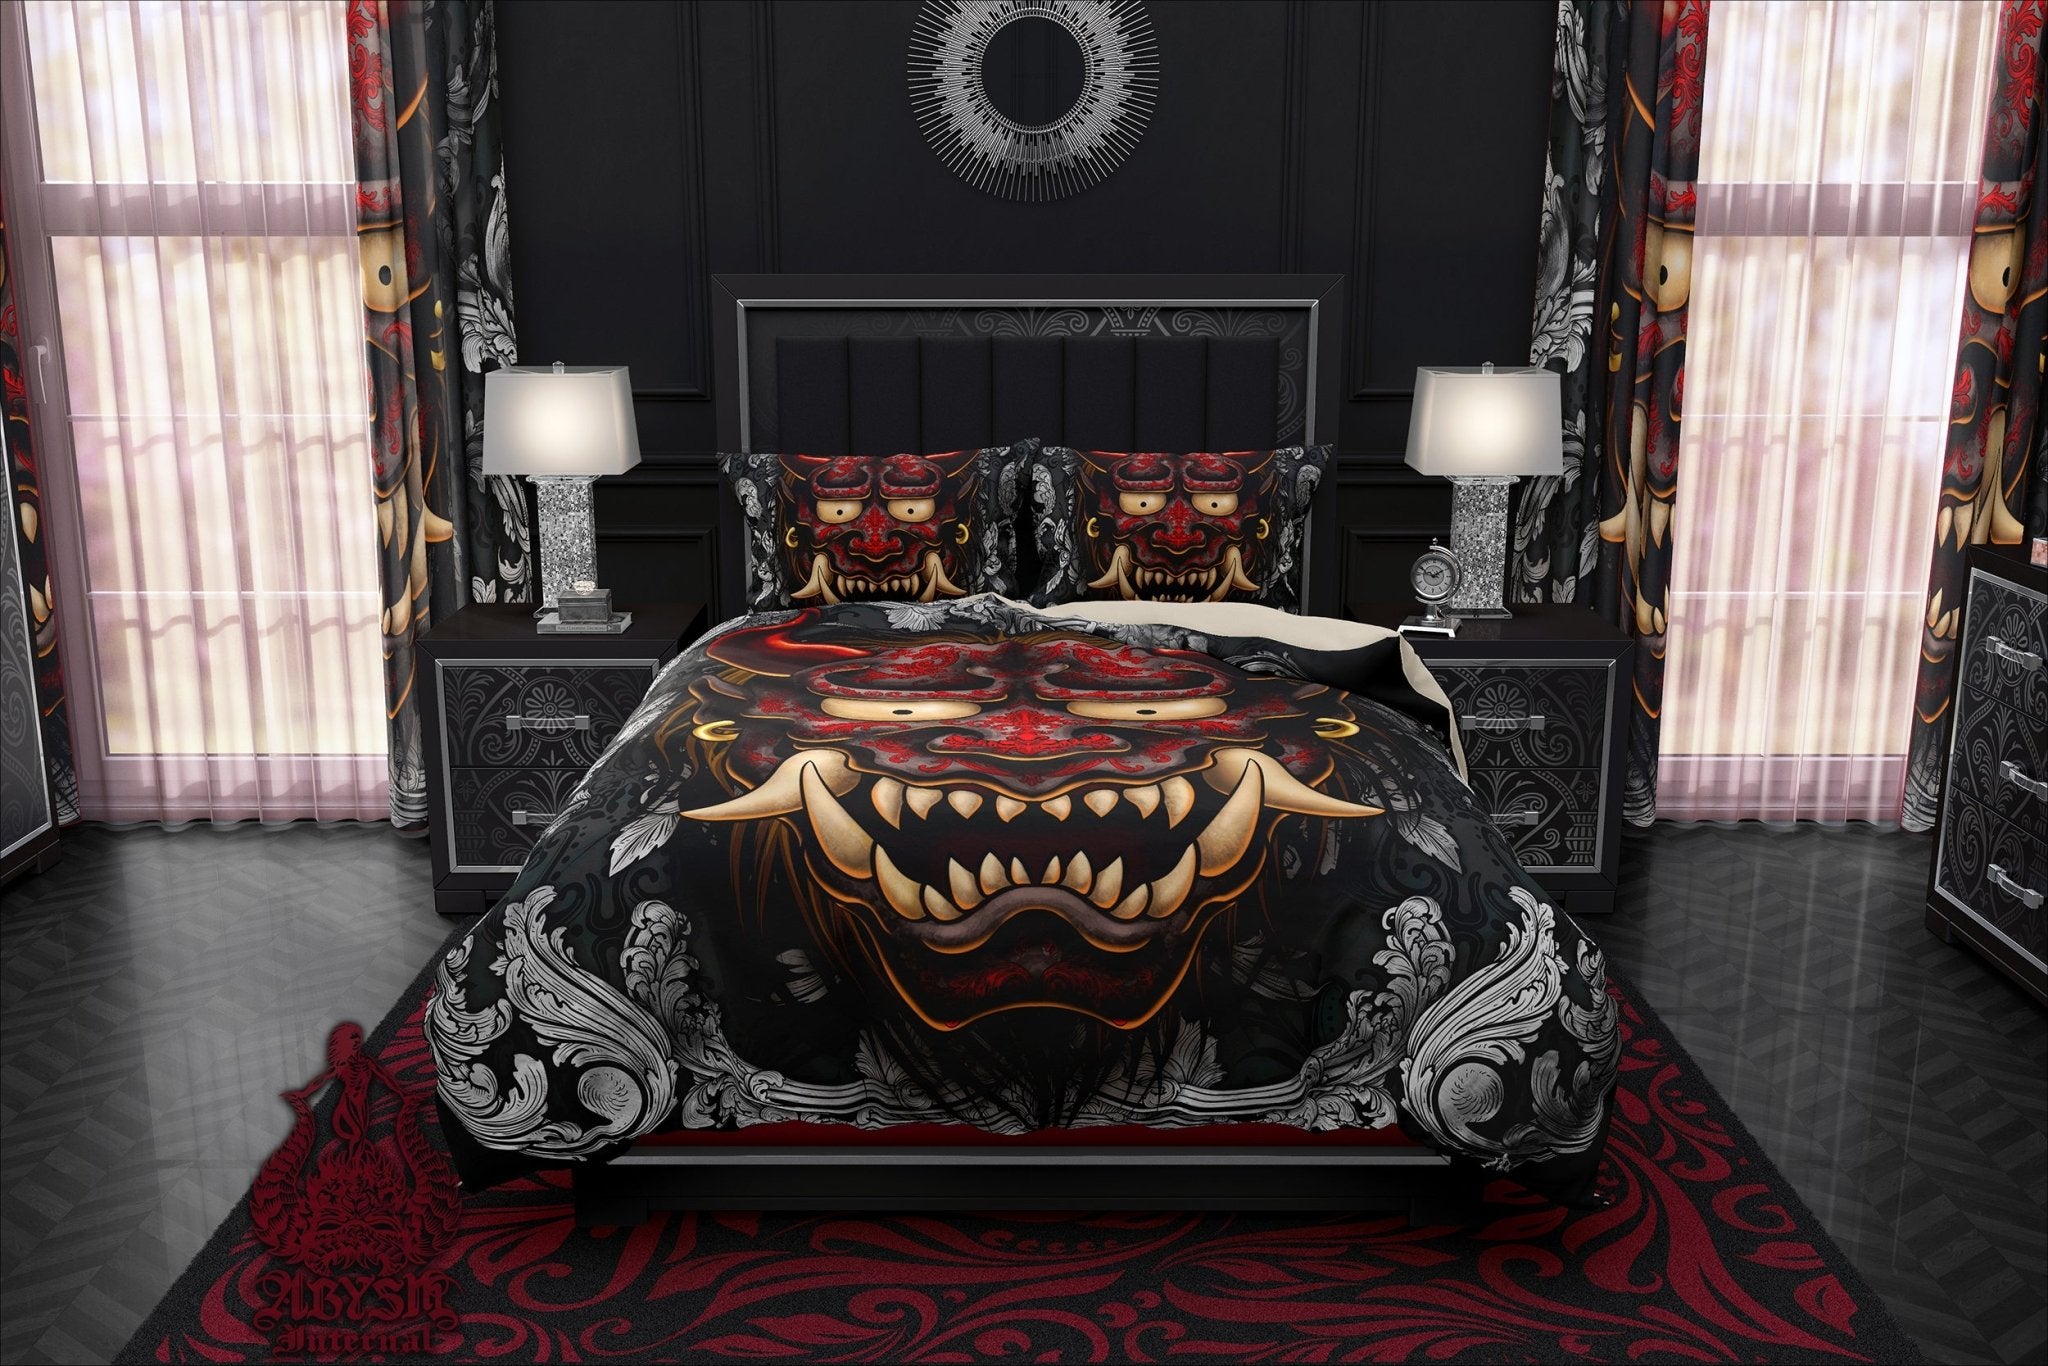 Oni Bedding Set, Comforter or Duvet, Anime Bed Cover, Alternative Bedroom Decor, King, Queen & Twin Size - Silver and Red, Japanese Demon, 2 Colors - Abysm Internal